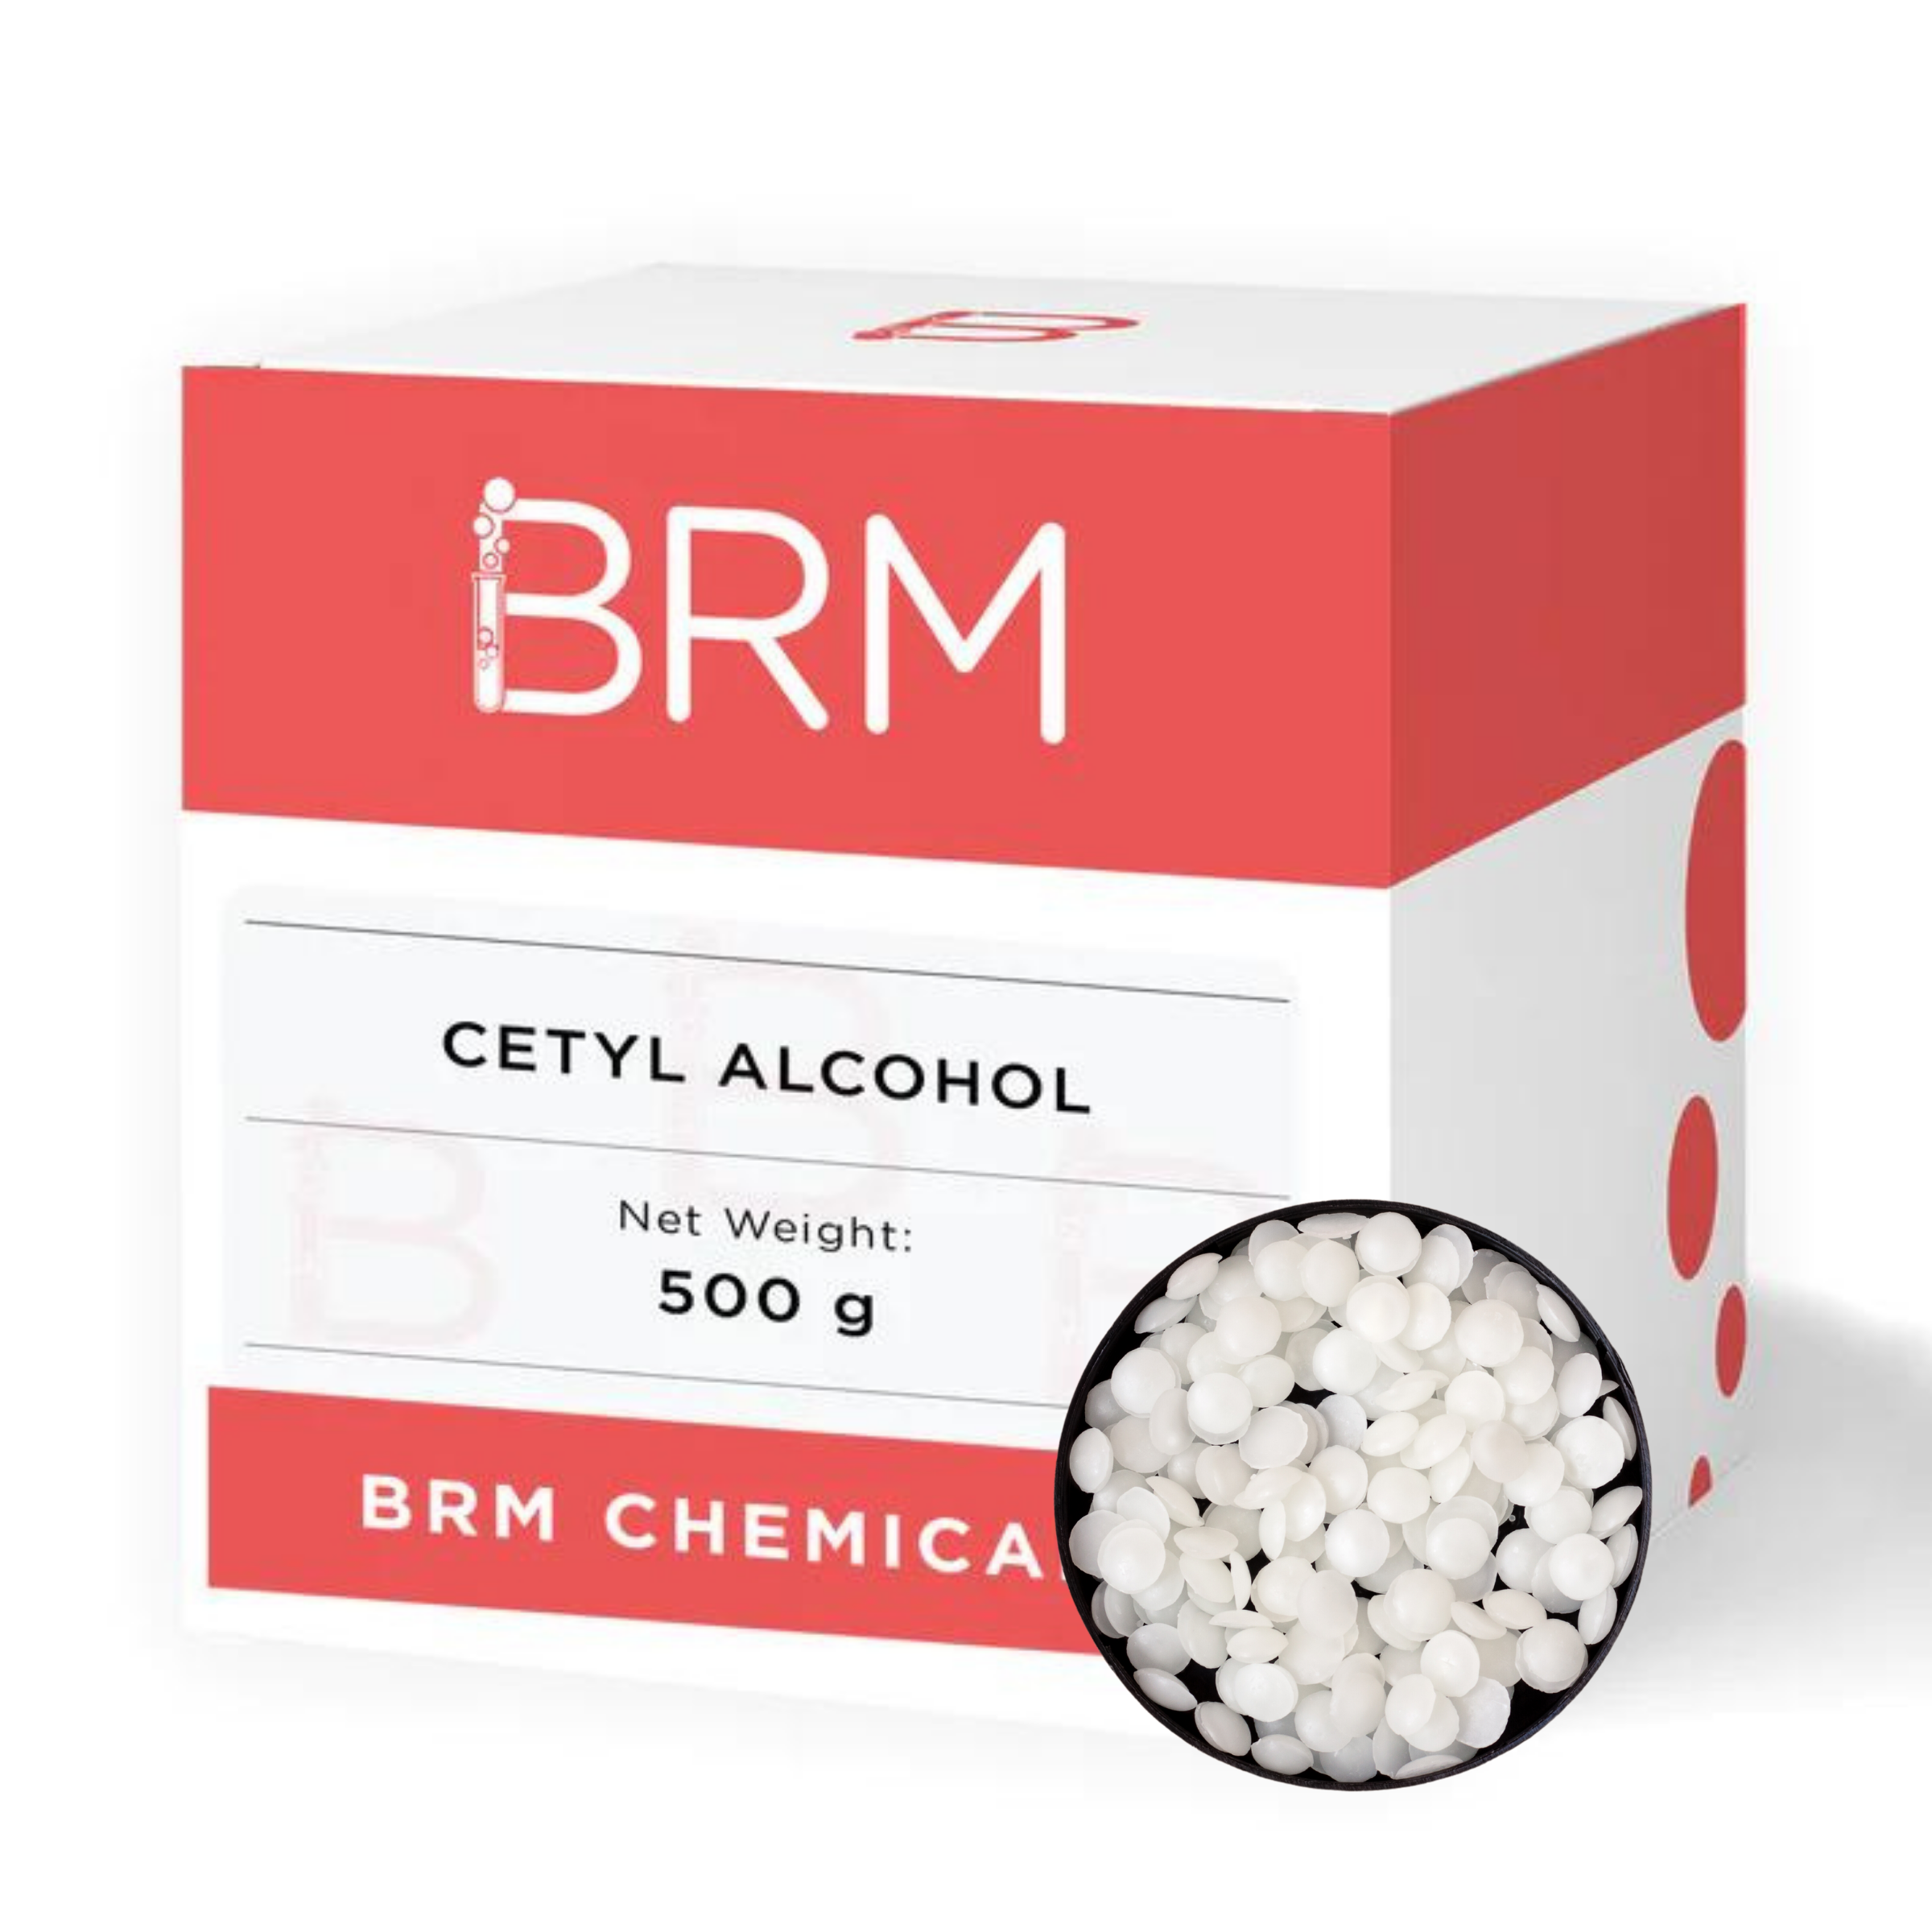 Cetyl Alcohol - Buy Cetyl Alcohol Online at Low Price in India